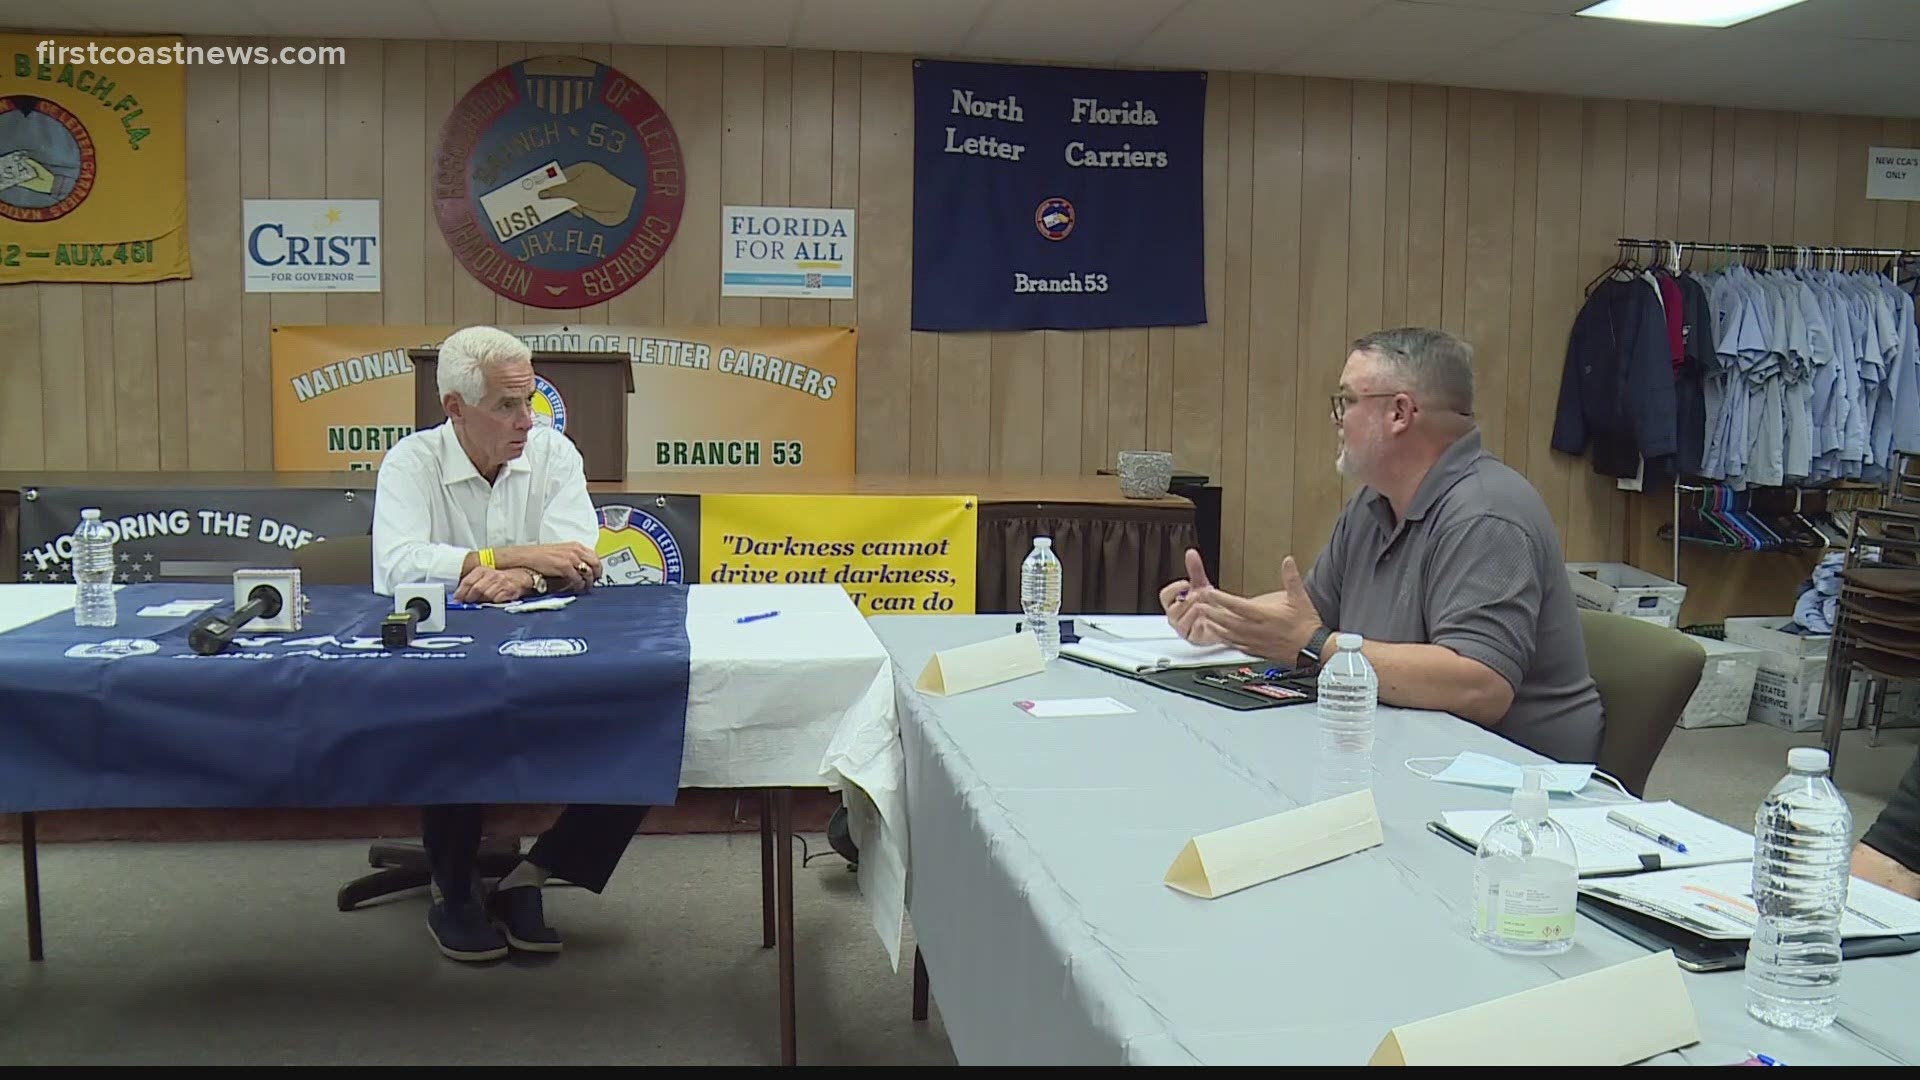 Charlie Crist meets with local leaders in Jacksonville